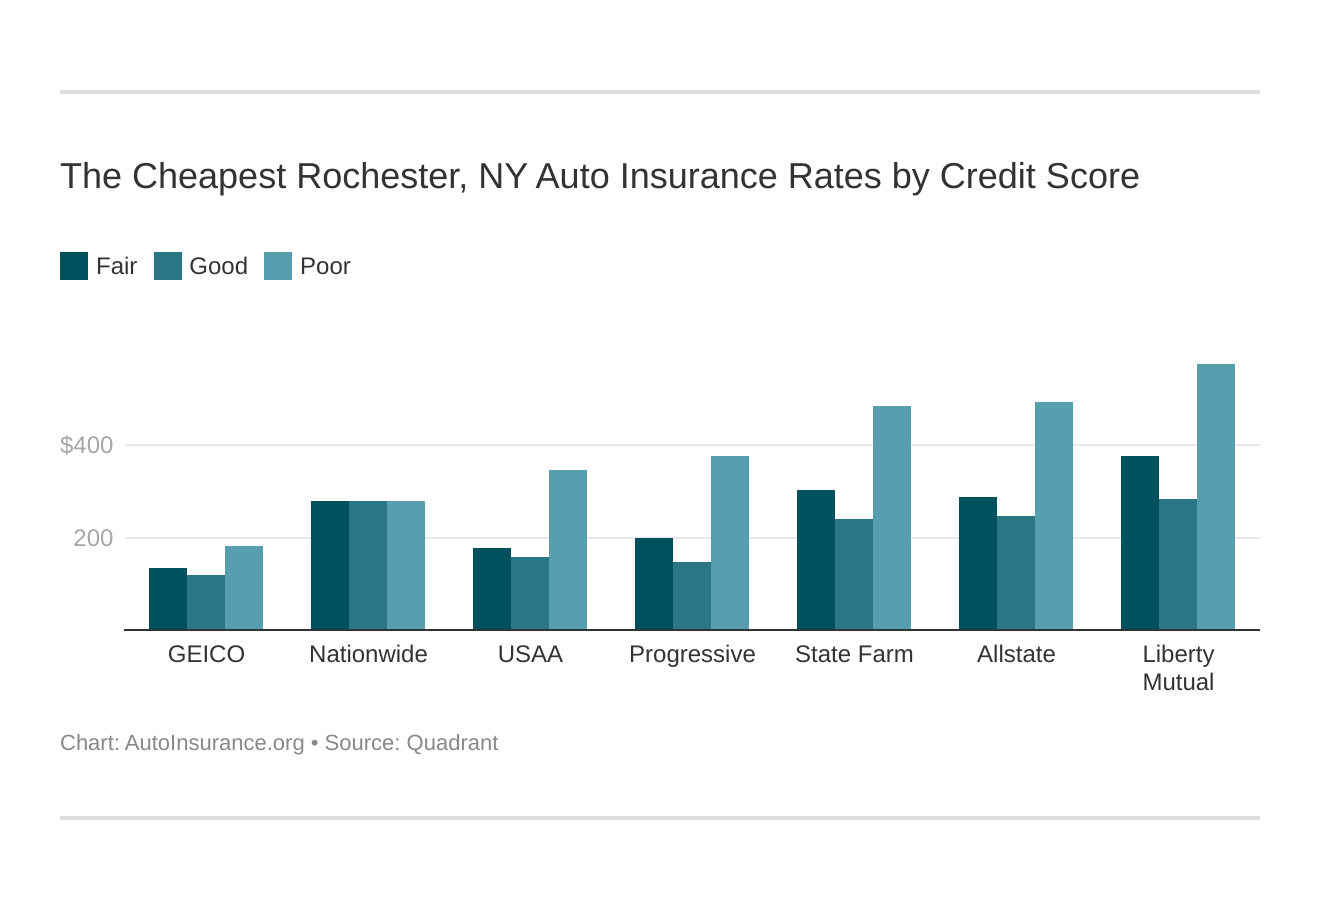 The Cheapest Rochester, NY Auto Insurance Rates by Credit Score